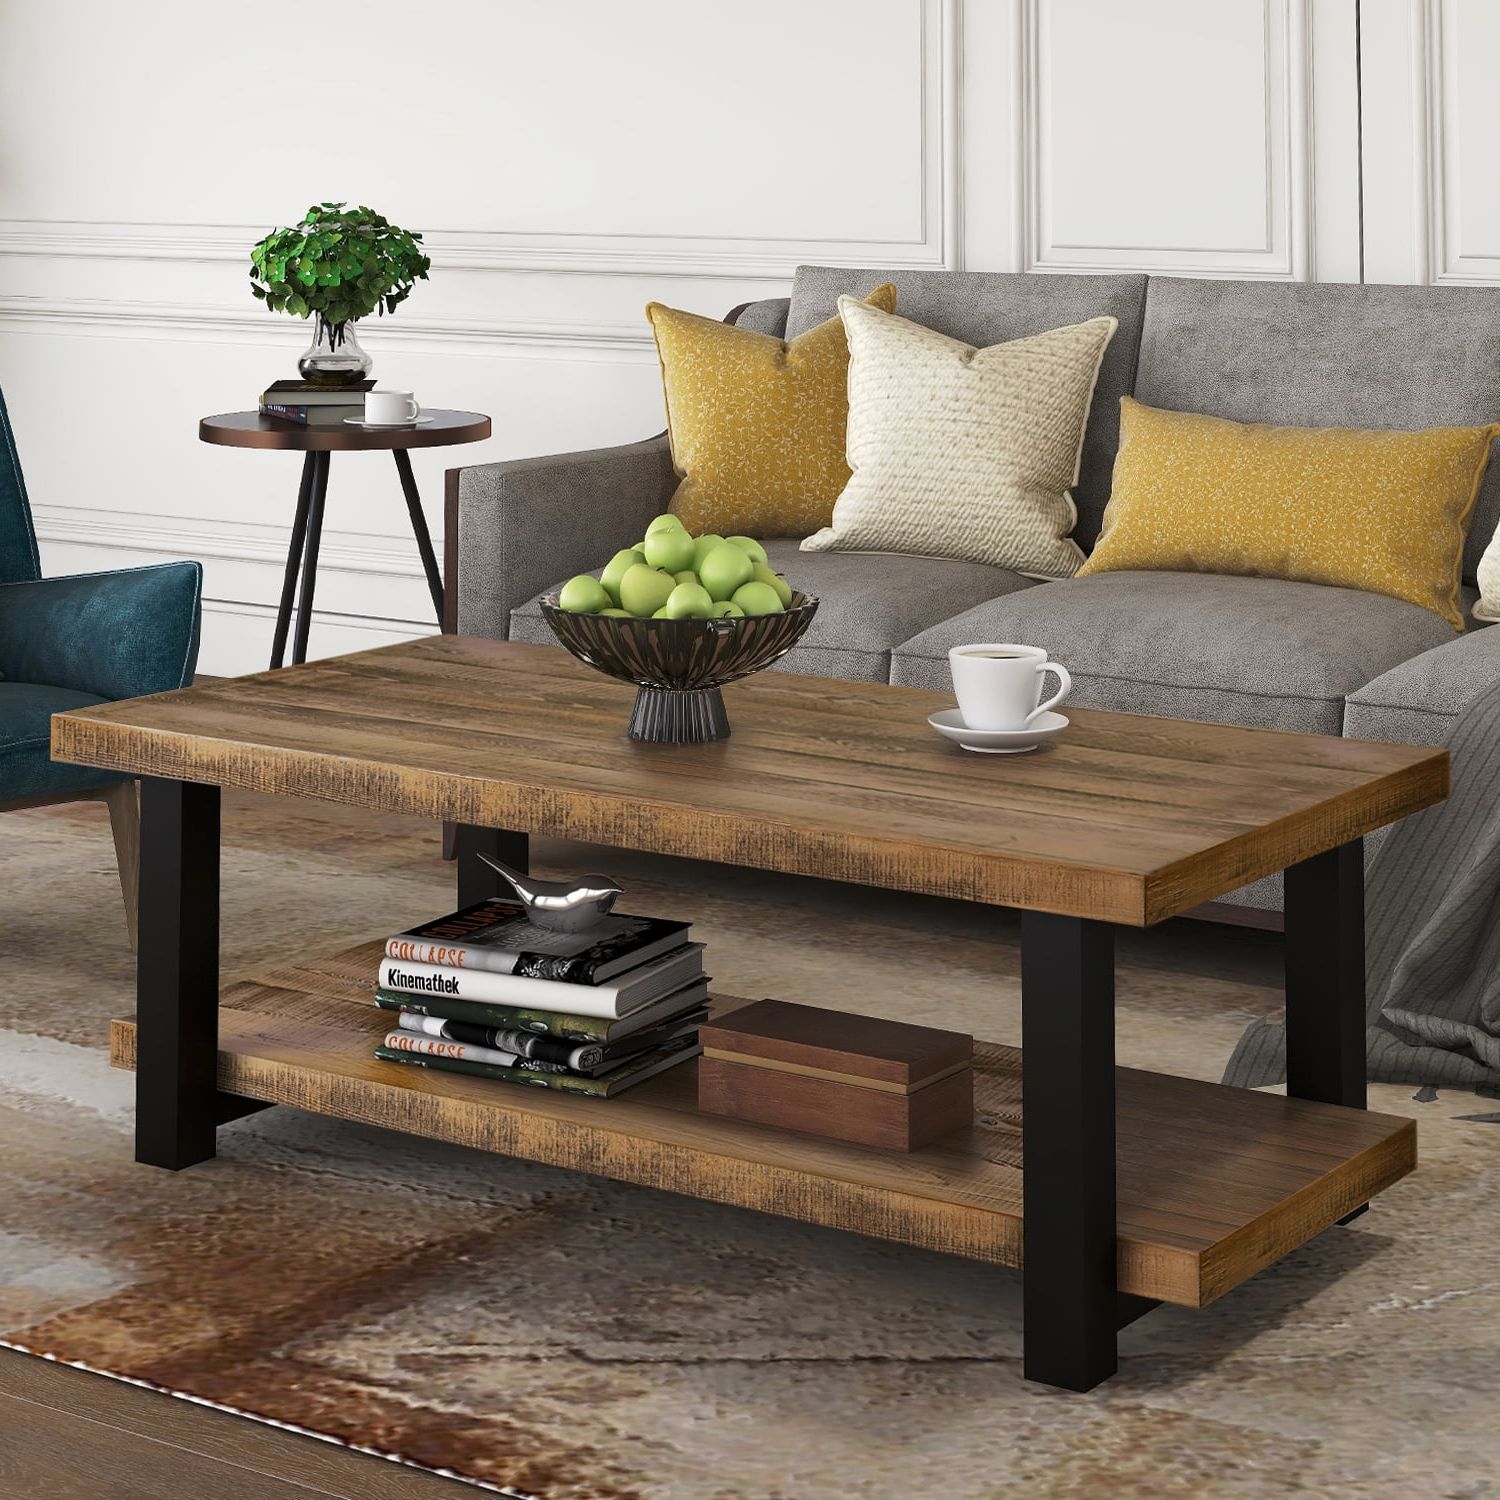 Topcobe Rustic Natural Coffee Table With Storage Shelf, Side End Table Pertaining To Rectangular Coffee Tables With Pedestal Bases (View 3 of 20)